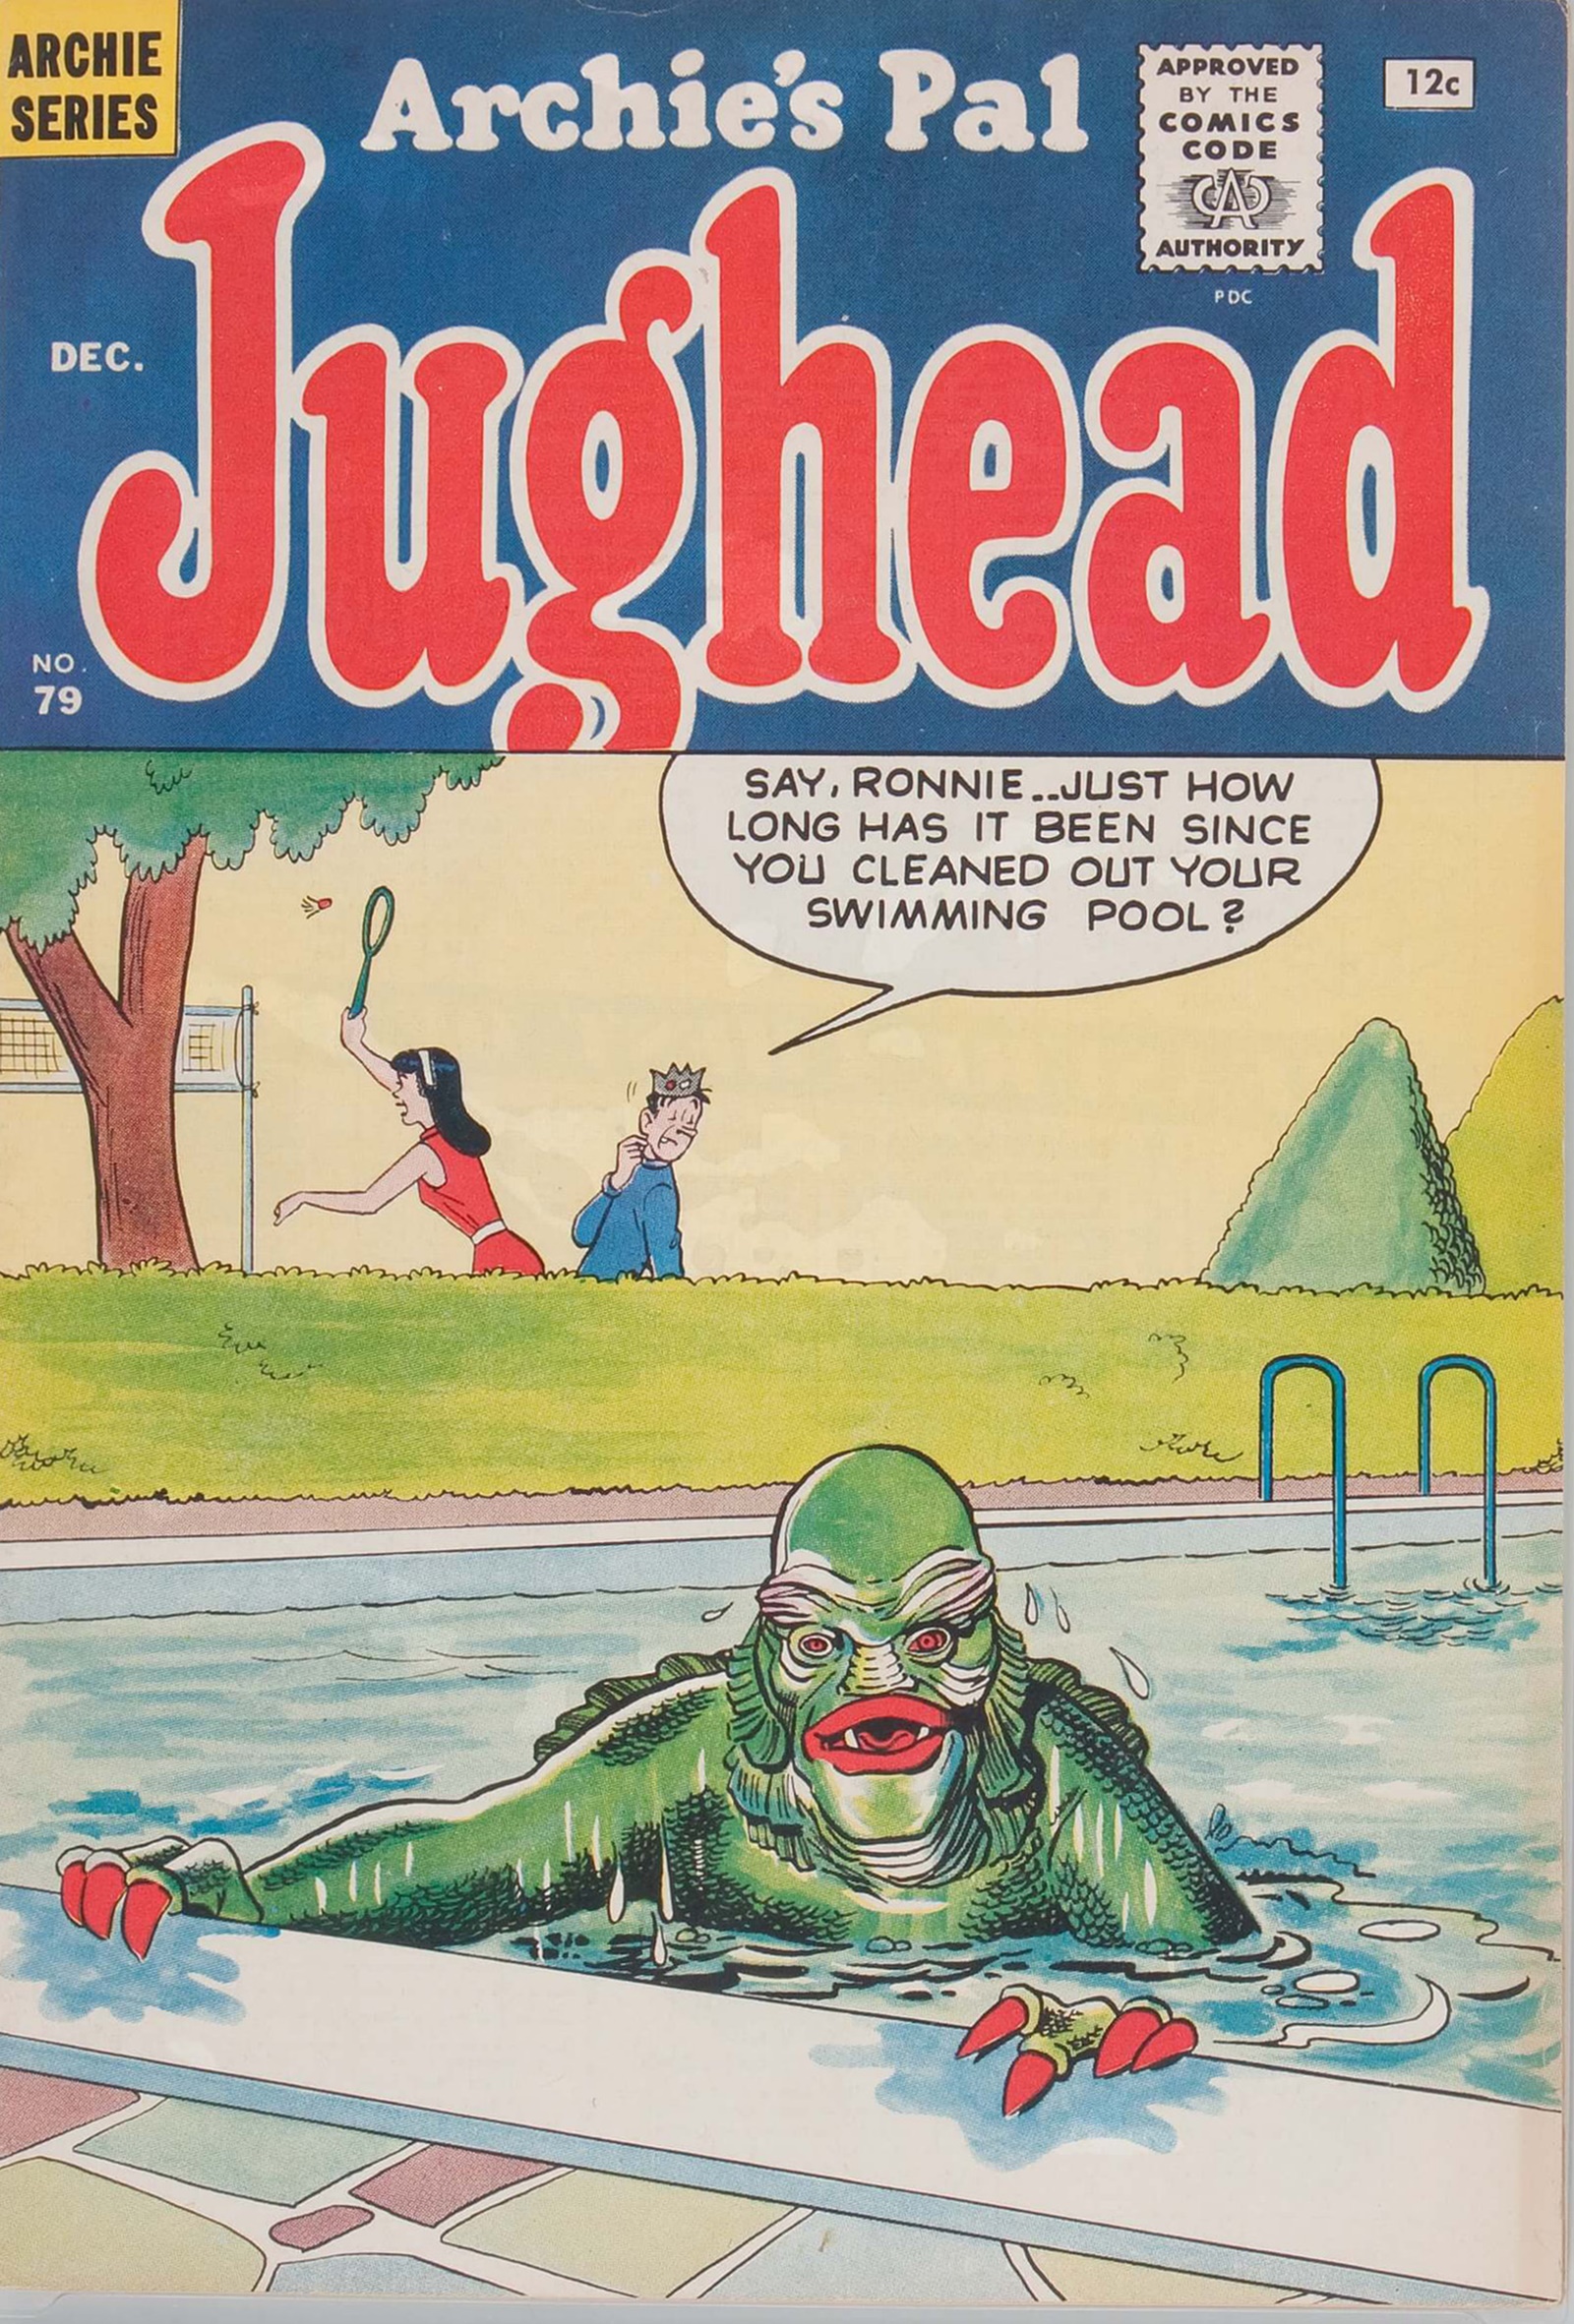 Read online Archie's Pal Jughead comic -  Issue #79 - 1